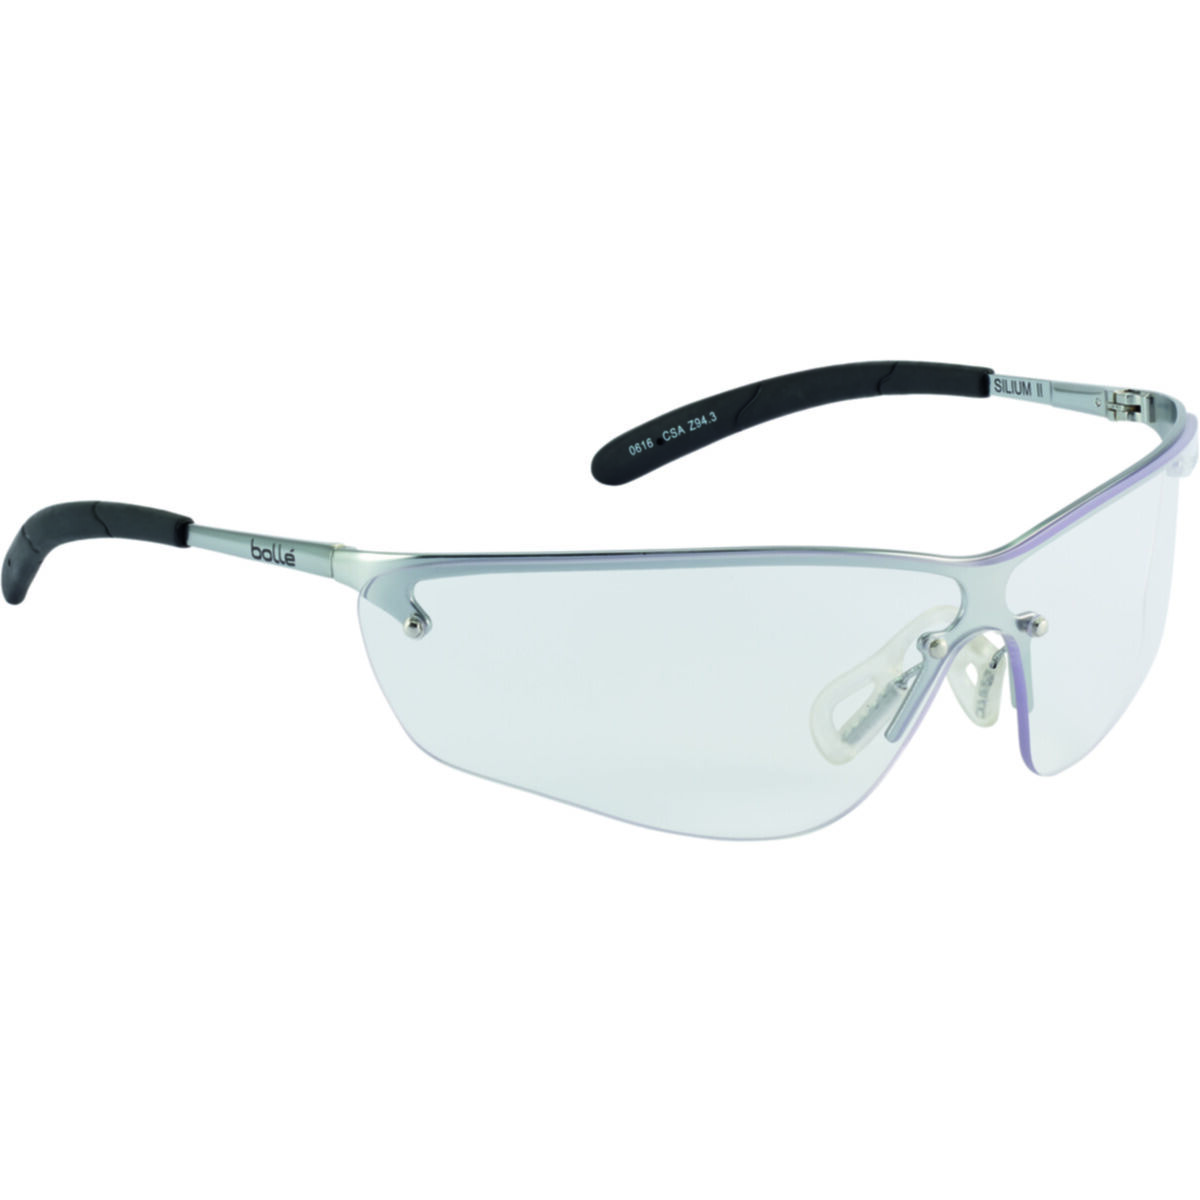 Bolle Silium Range Sports Cycling Safety Glasses Spectacles Eye Protection 